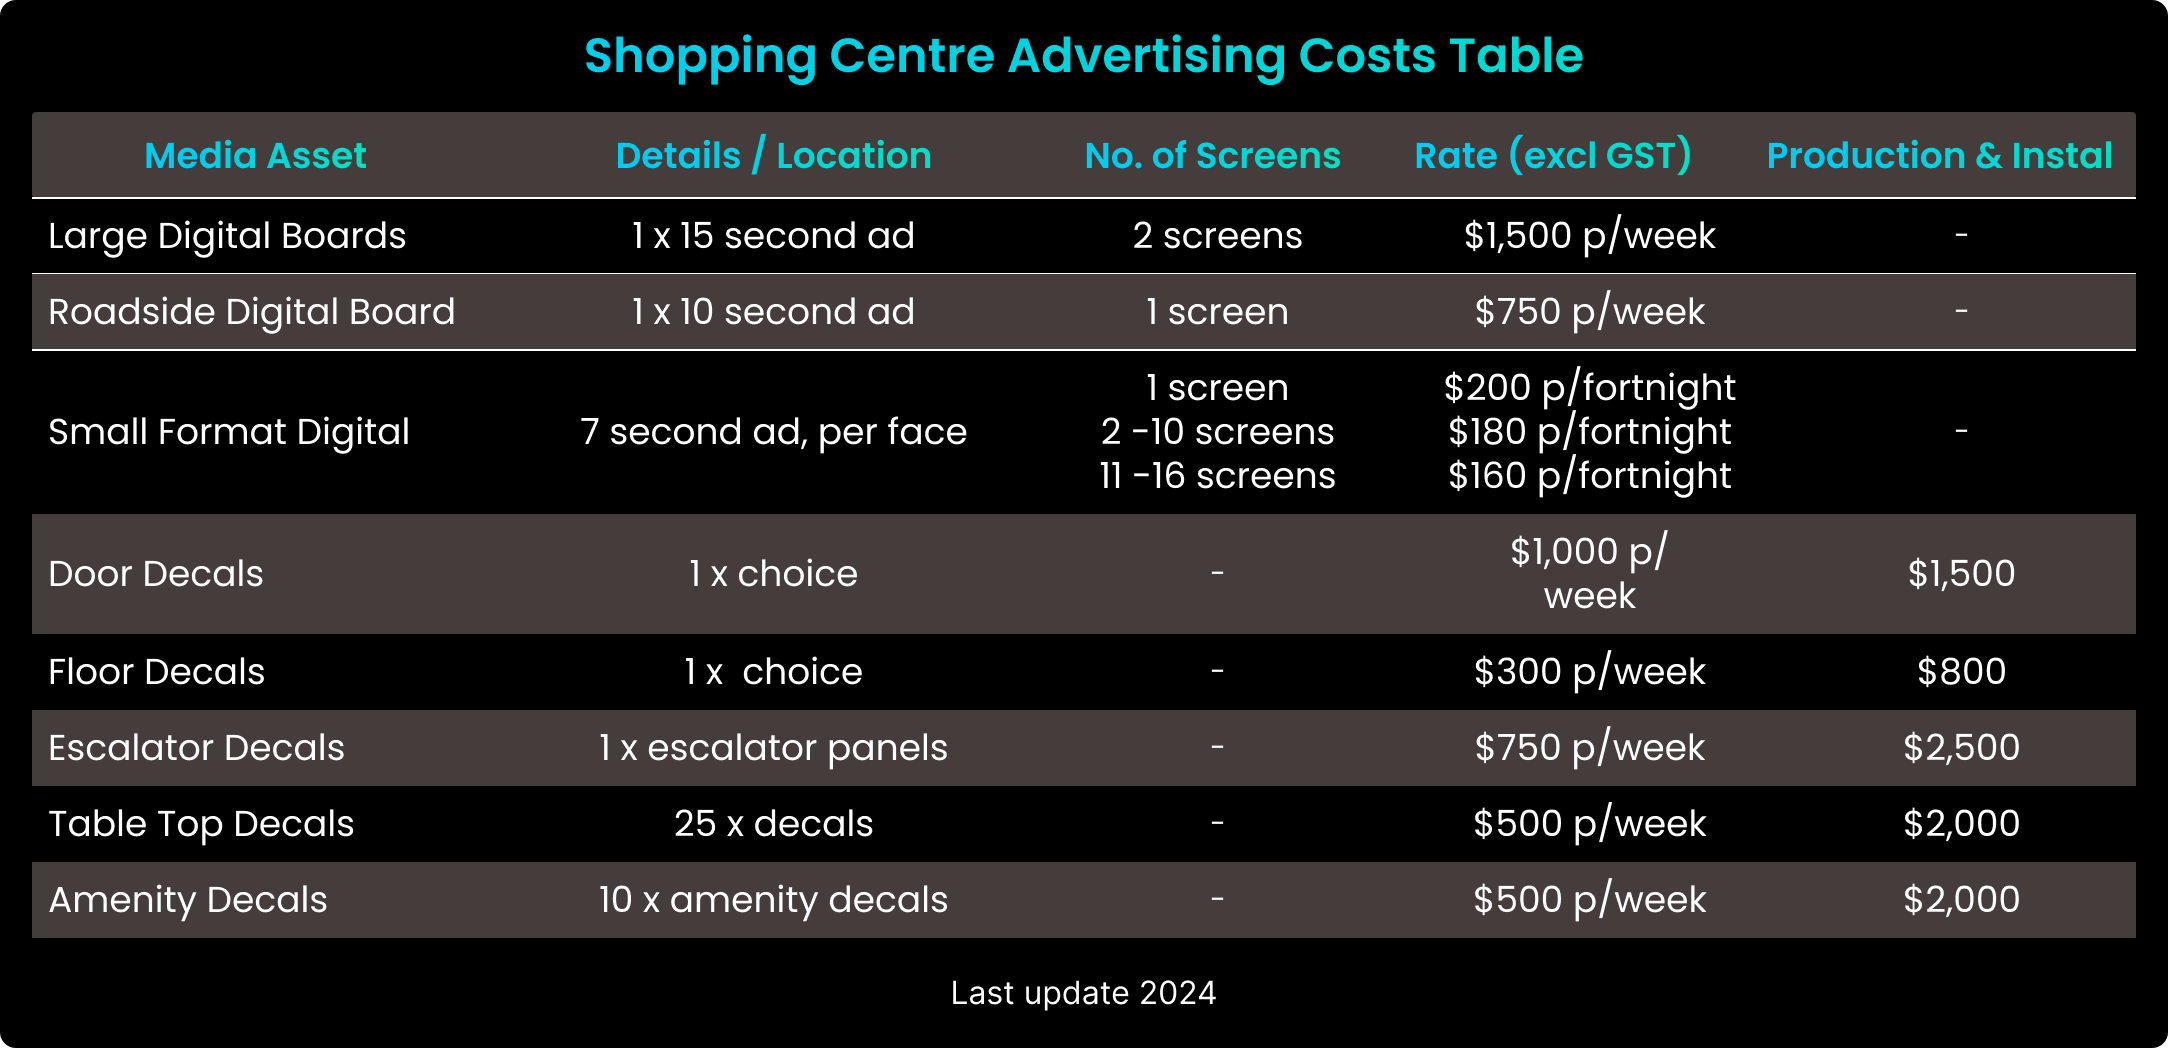 Shopping Centre advertising cost table